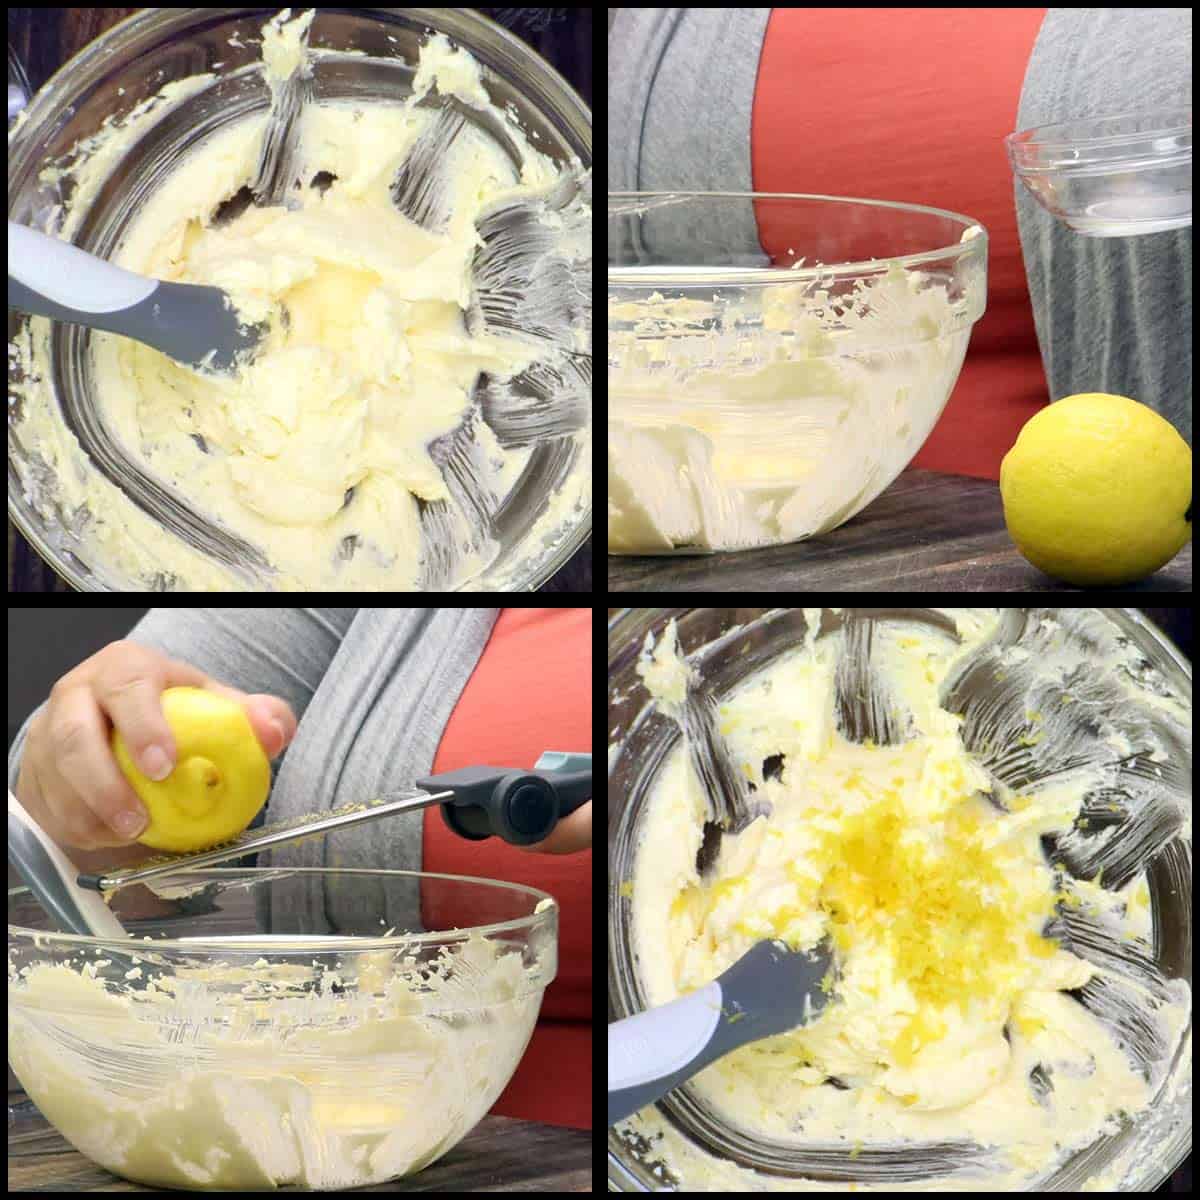 adding extract and zesting lemon over the bowl of butter mixture.